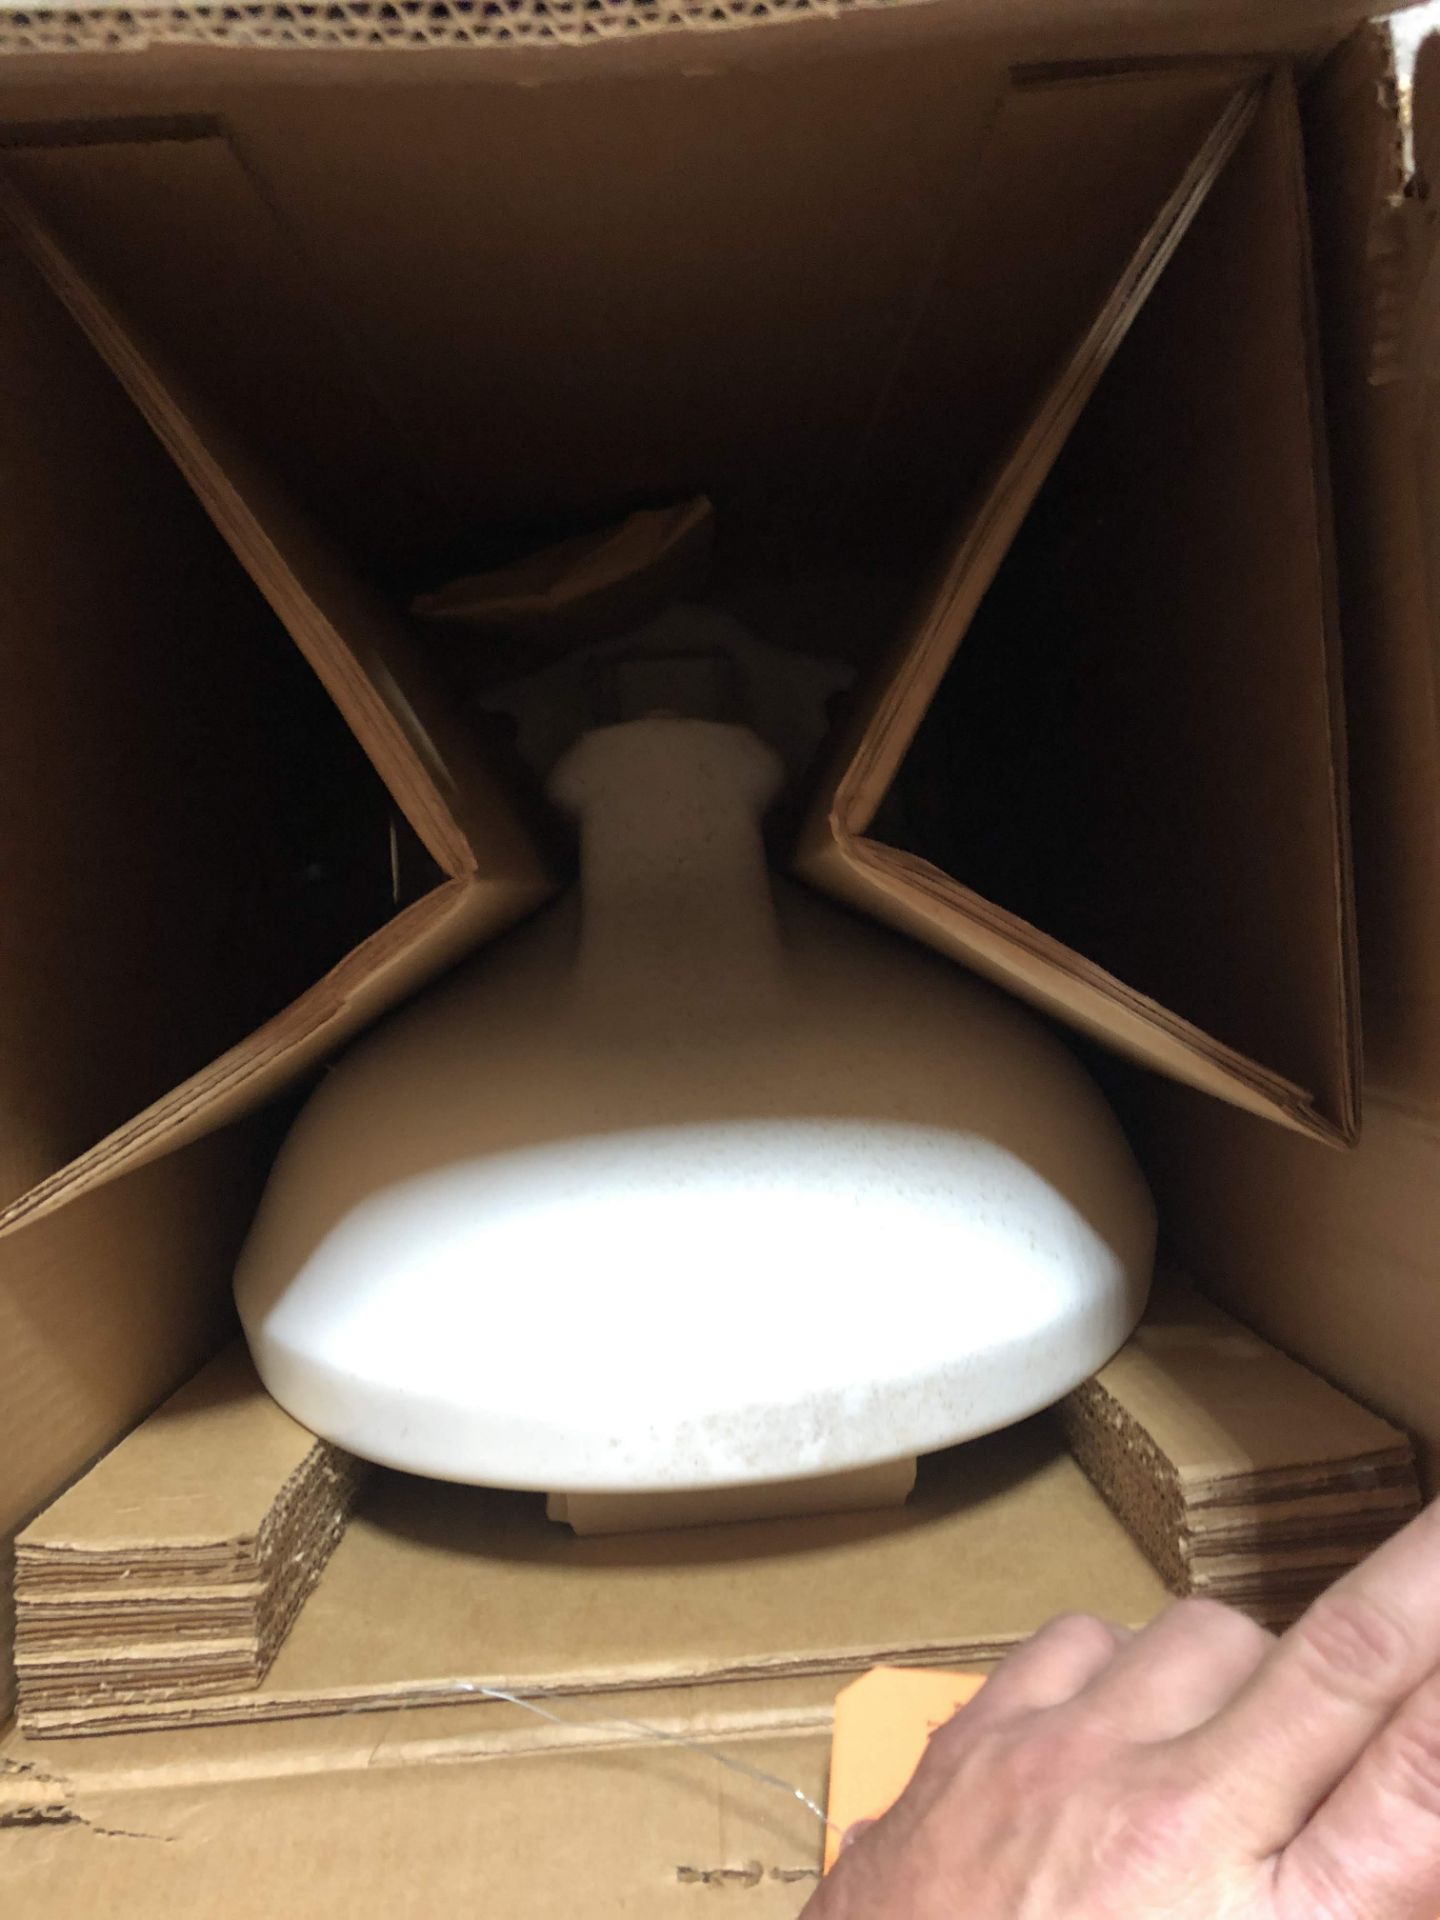 AFWALL ELONGATED BOWL (WHITE) 2294011(LOCATED AT 2696 E LYTLE 5 POINTS ROAD, DAYTON, OH 45458) - Bild 3 aus 3